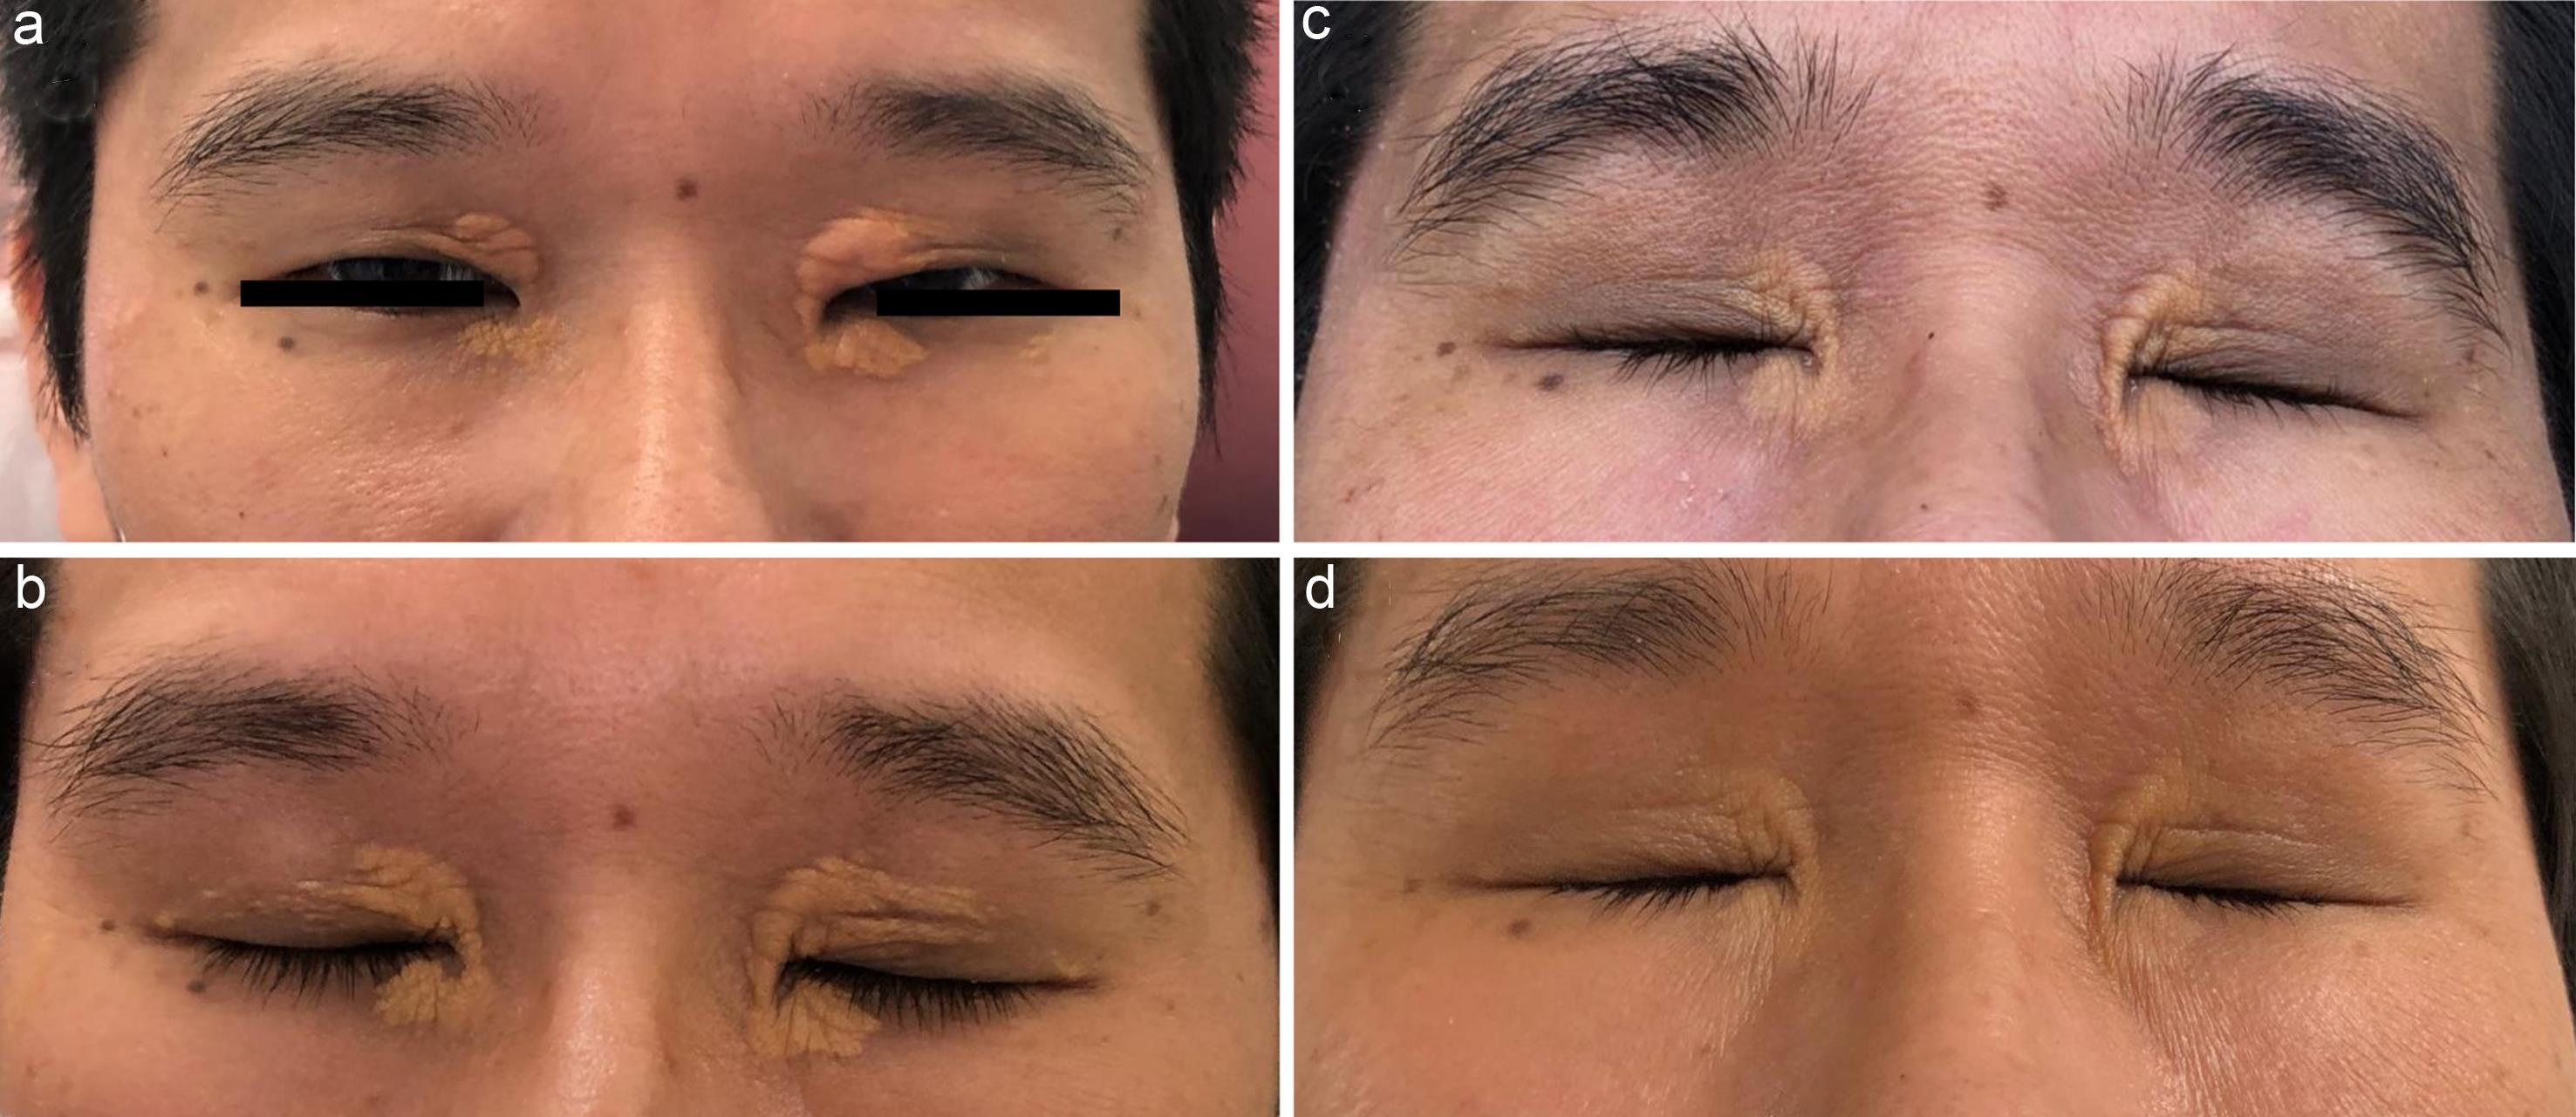 Features of xanthelasma palpebrarum (XP): exacerbated lesions during infliximab treatment (a), no improvement with the Special C regimen (b), partial improvement after a MEK inhibitor (c), and marked improvement after combined BRAF/MEK inhibitors (d).